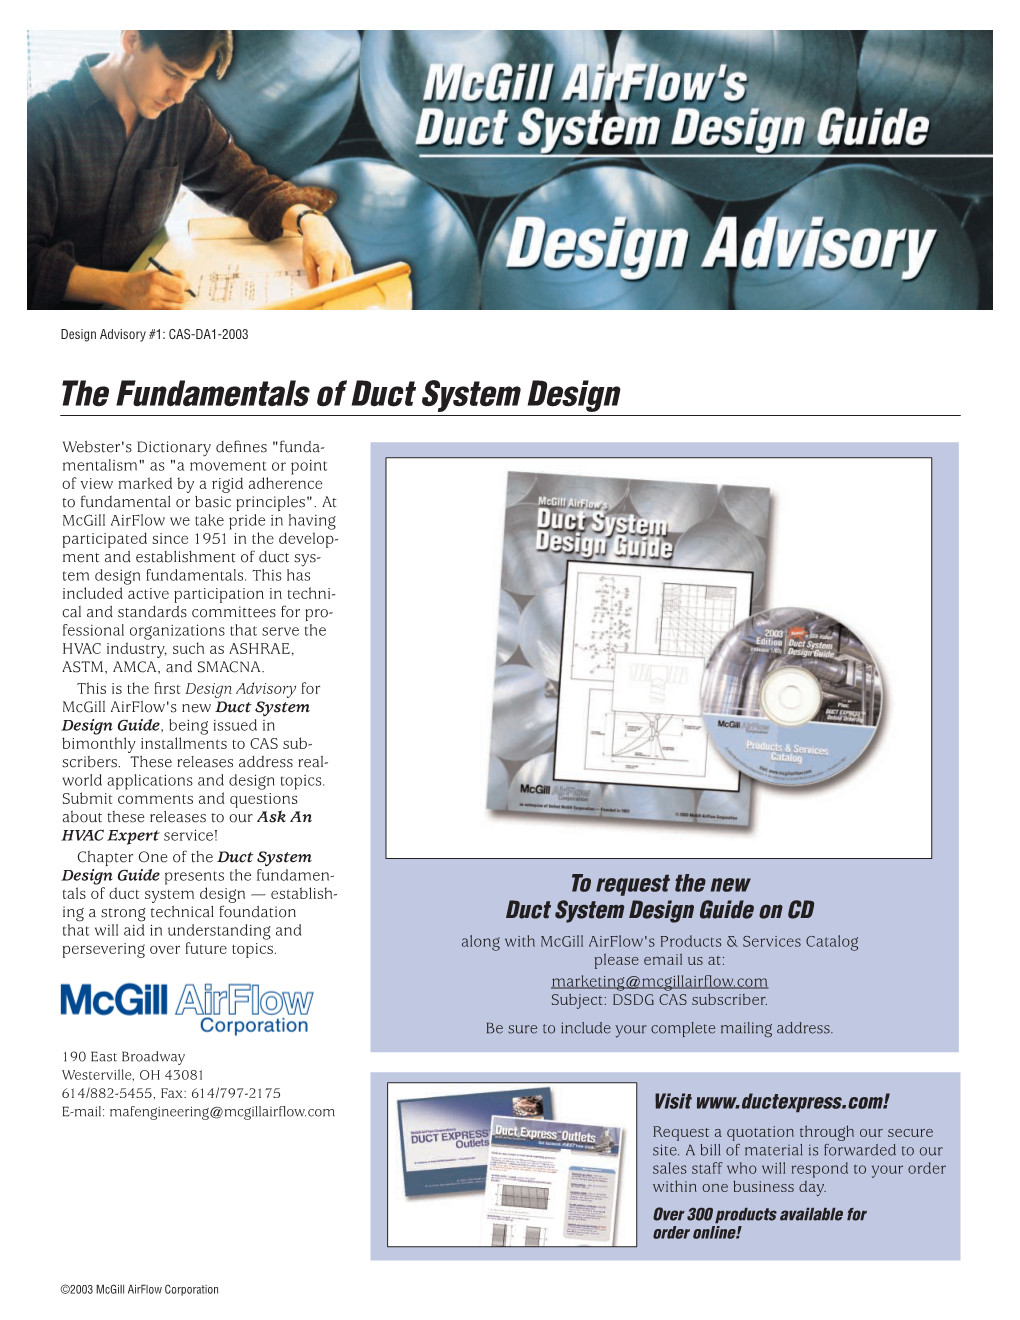 The Fundamentals of Duct System Design